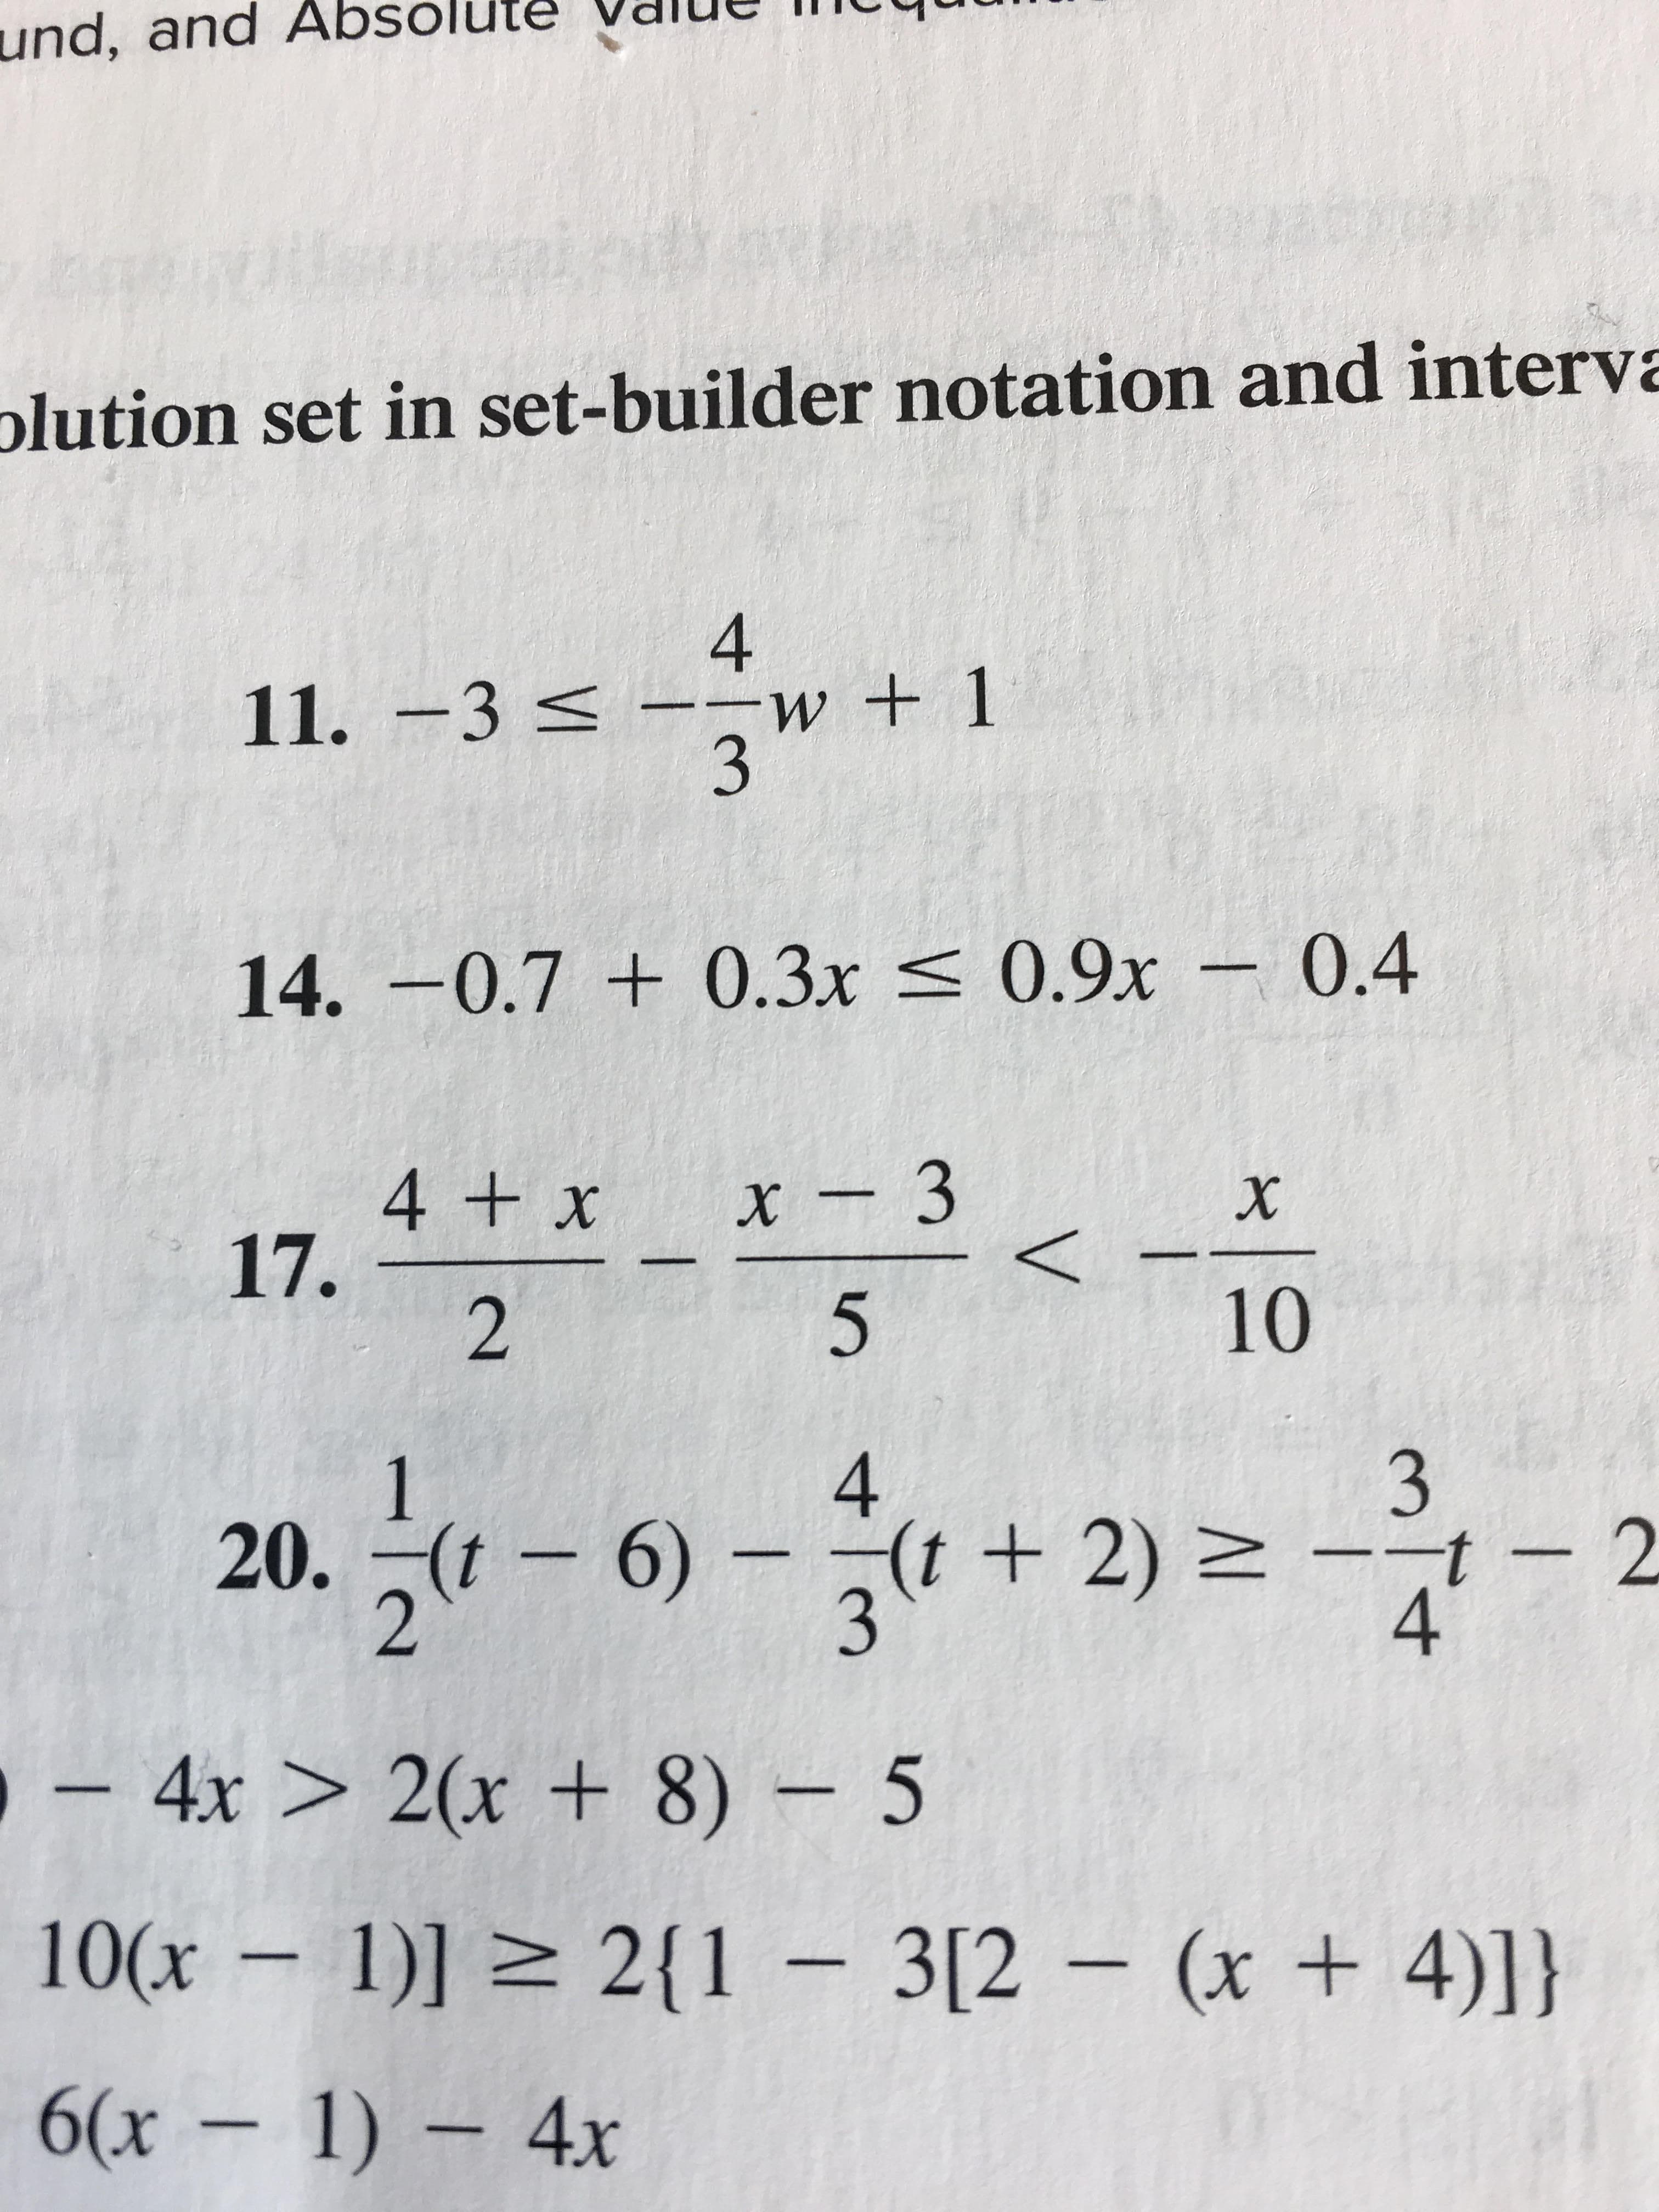 und,
and
Absolute
y
olution set in set-builder notation and interv
4
11.-3<-w + 1
14. -0.7 0.3x s 0.9x 0.4
10
4
2
4
100x 1)] 2 312 (x4)])
6(x 1) 4x
